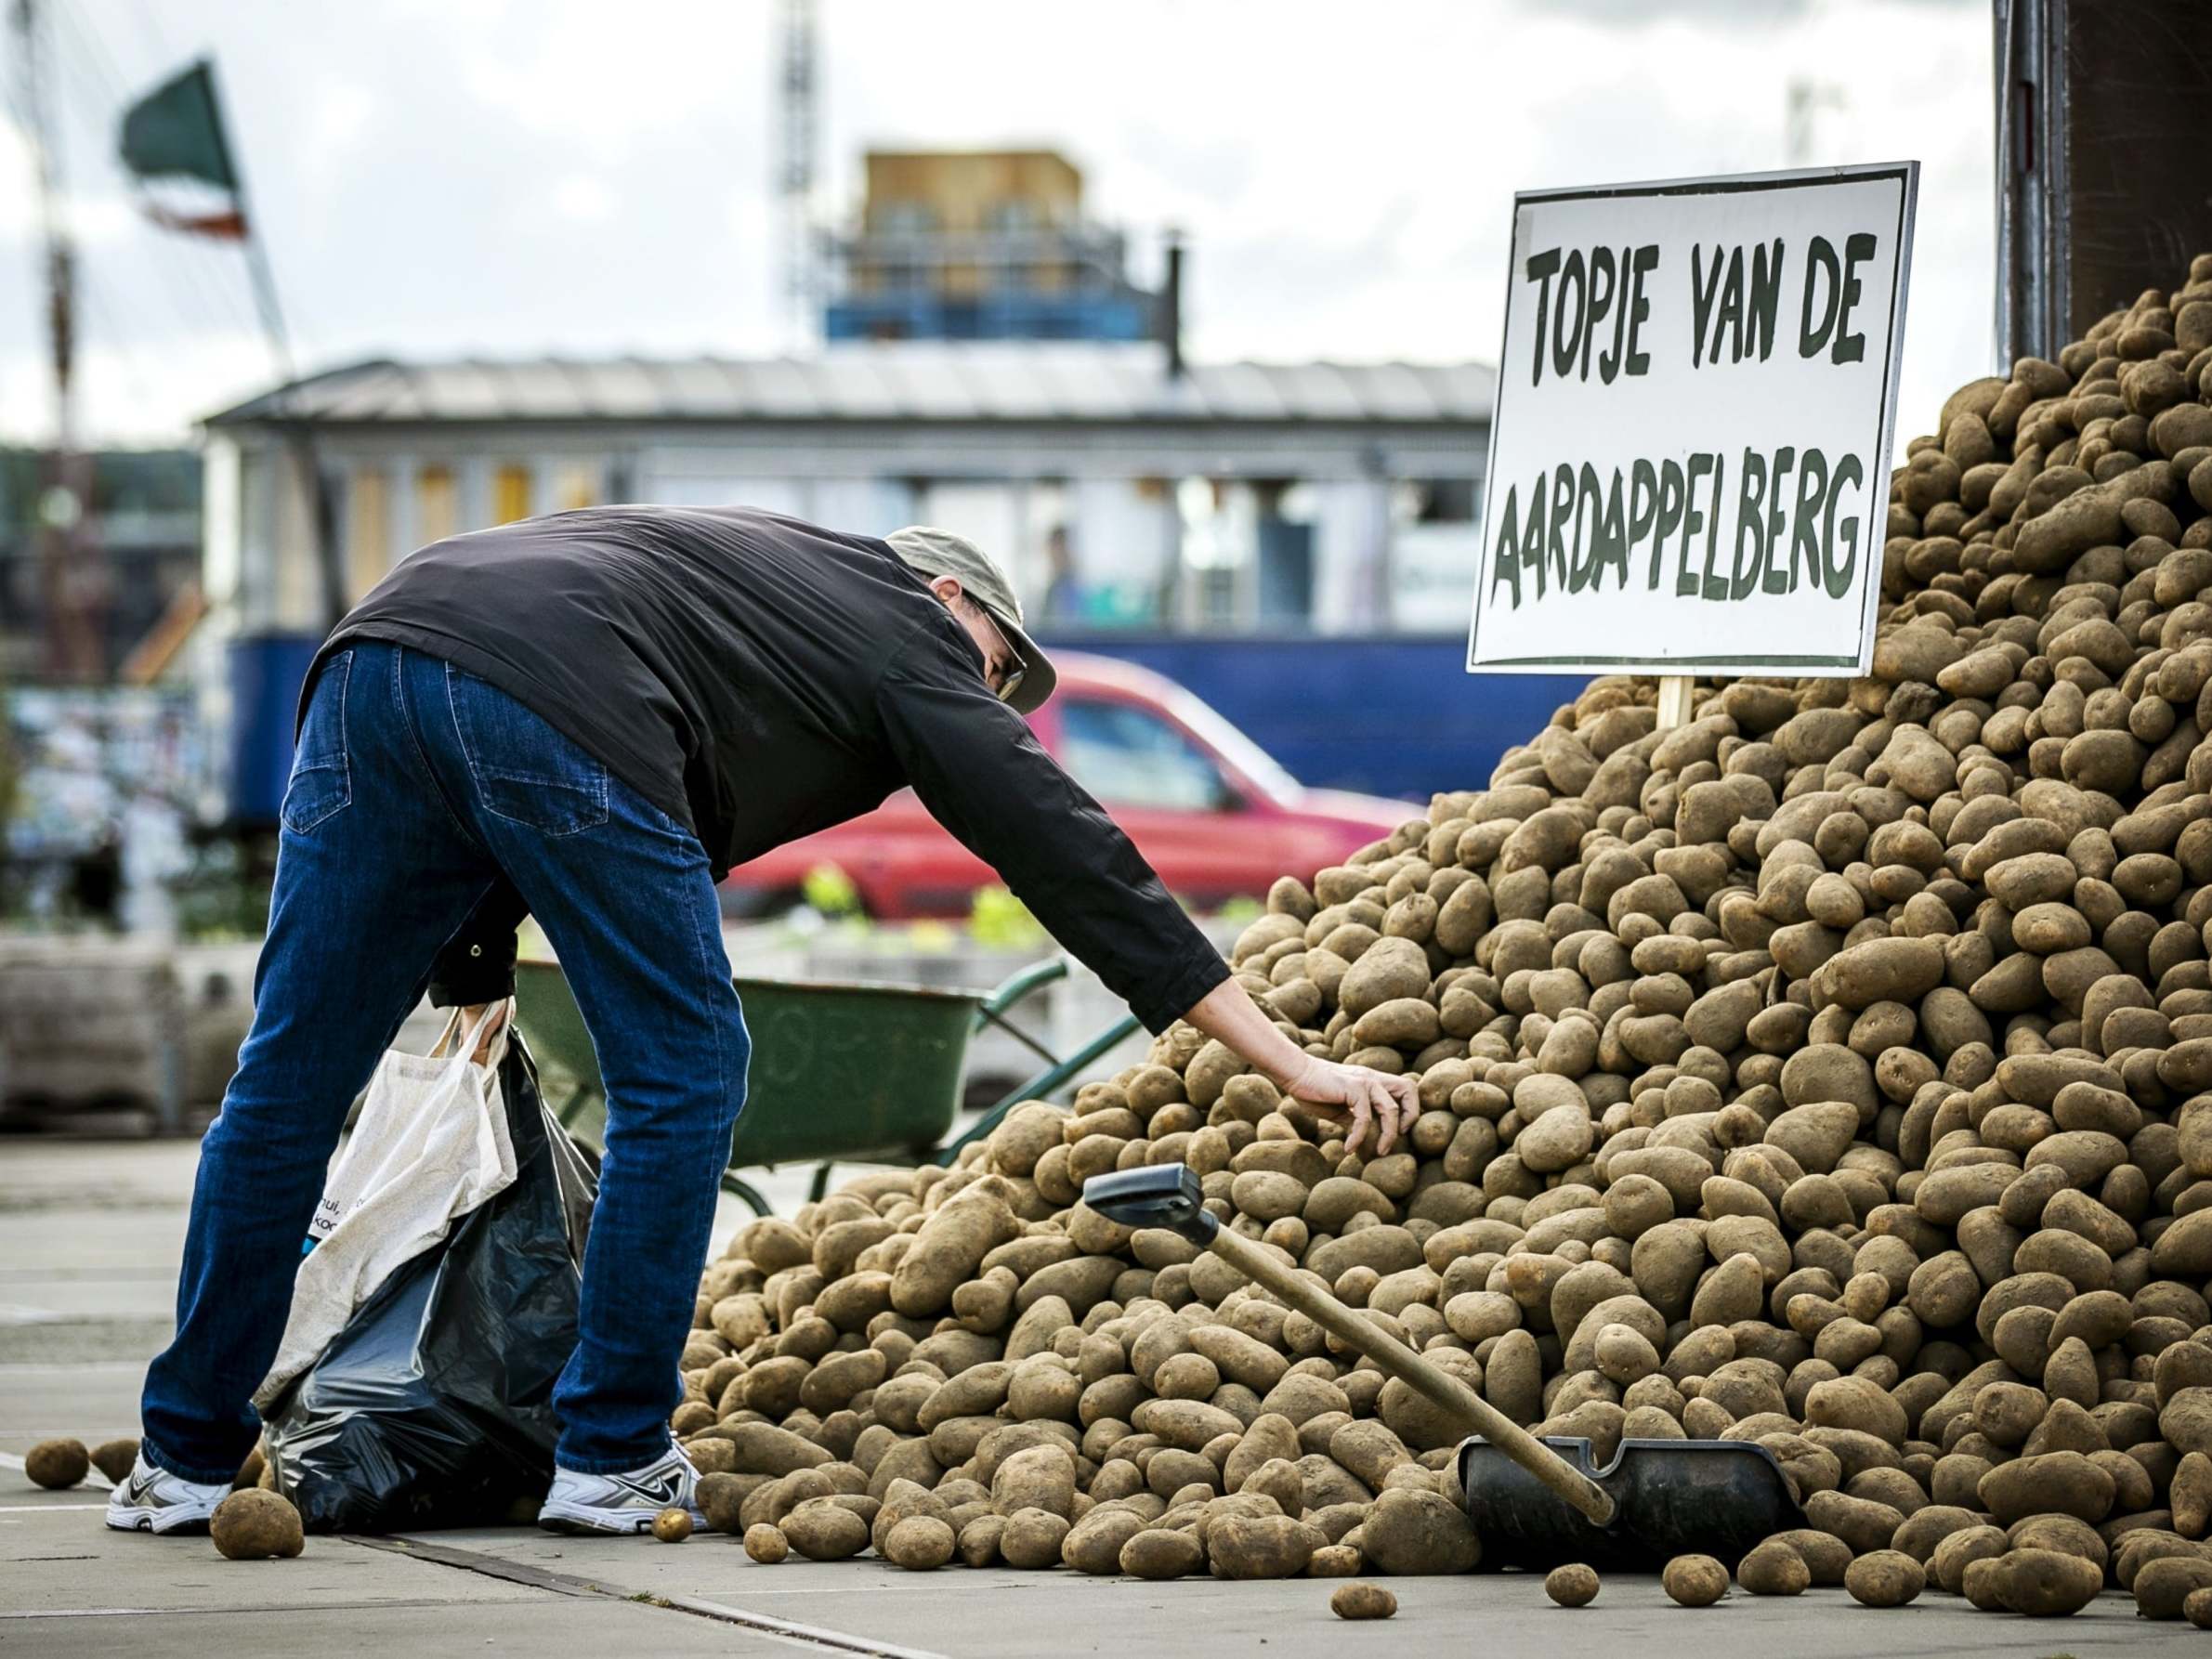 A man collects potatoes distributed for free by a lorry in Amsterdam